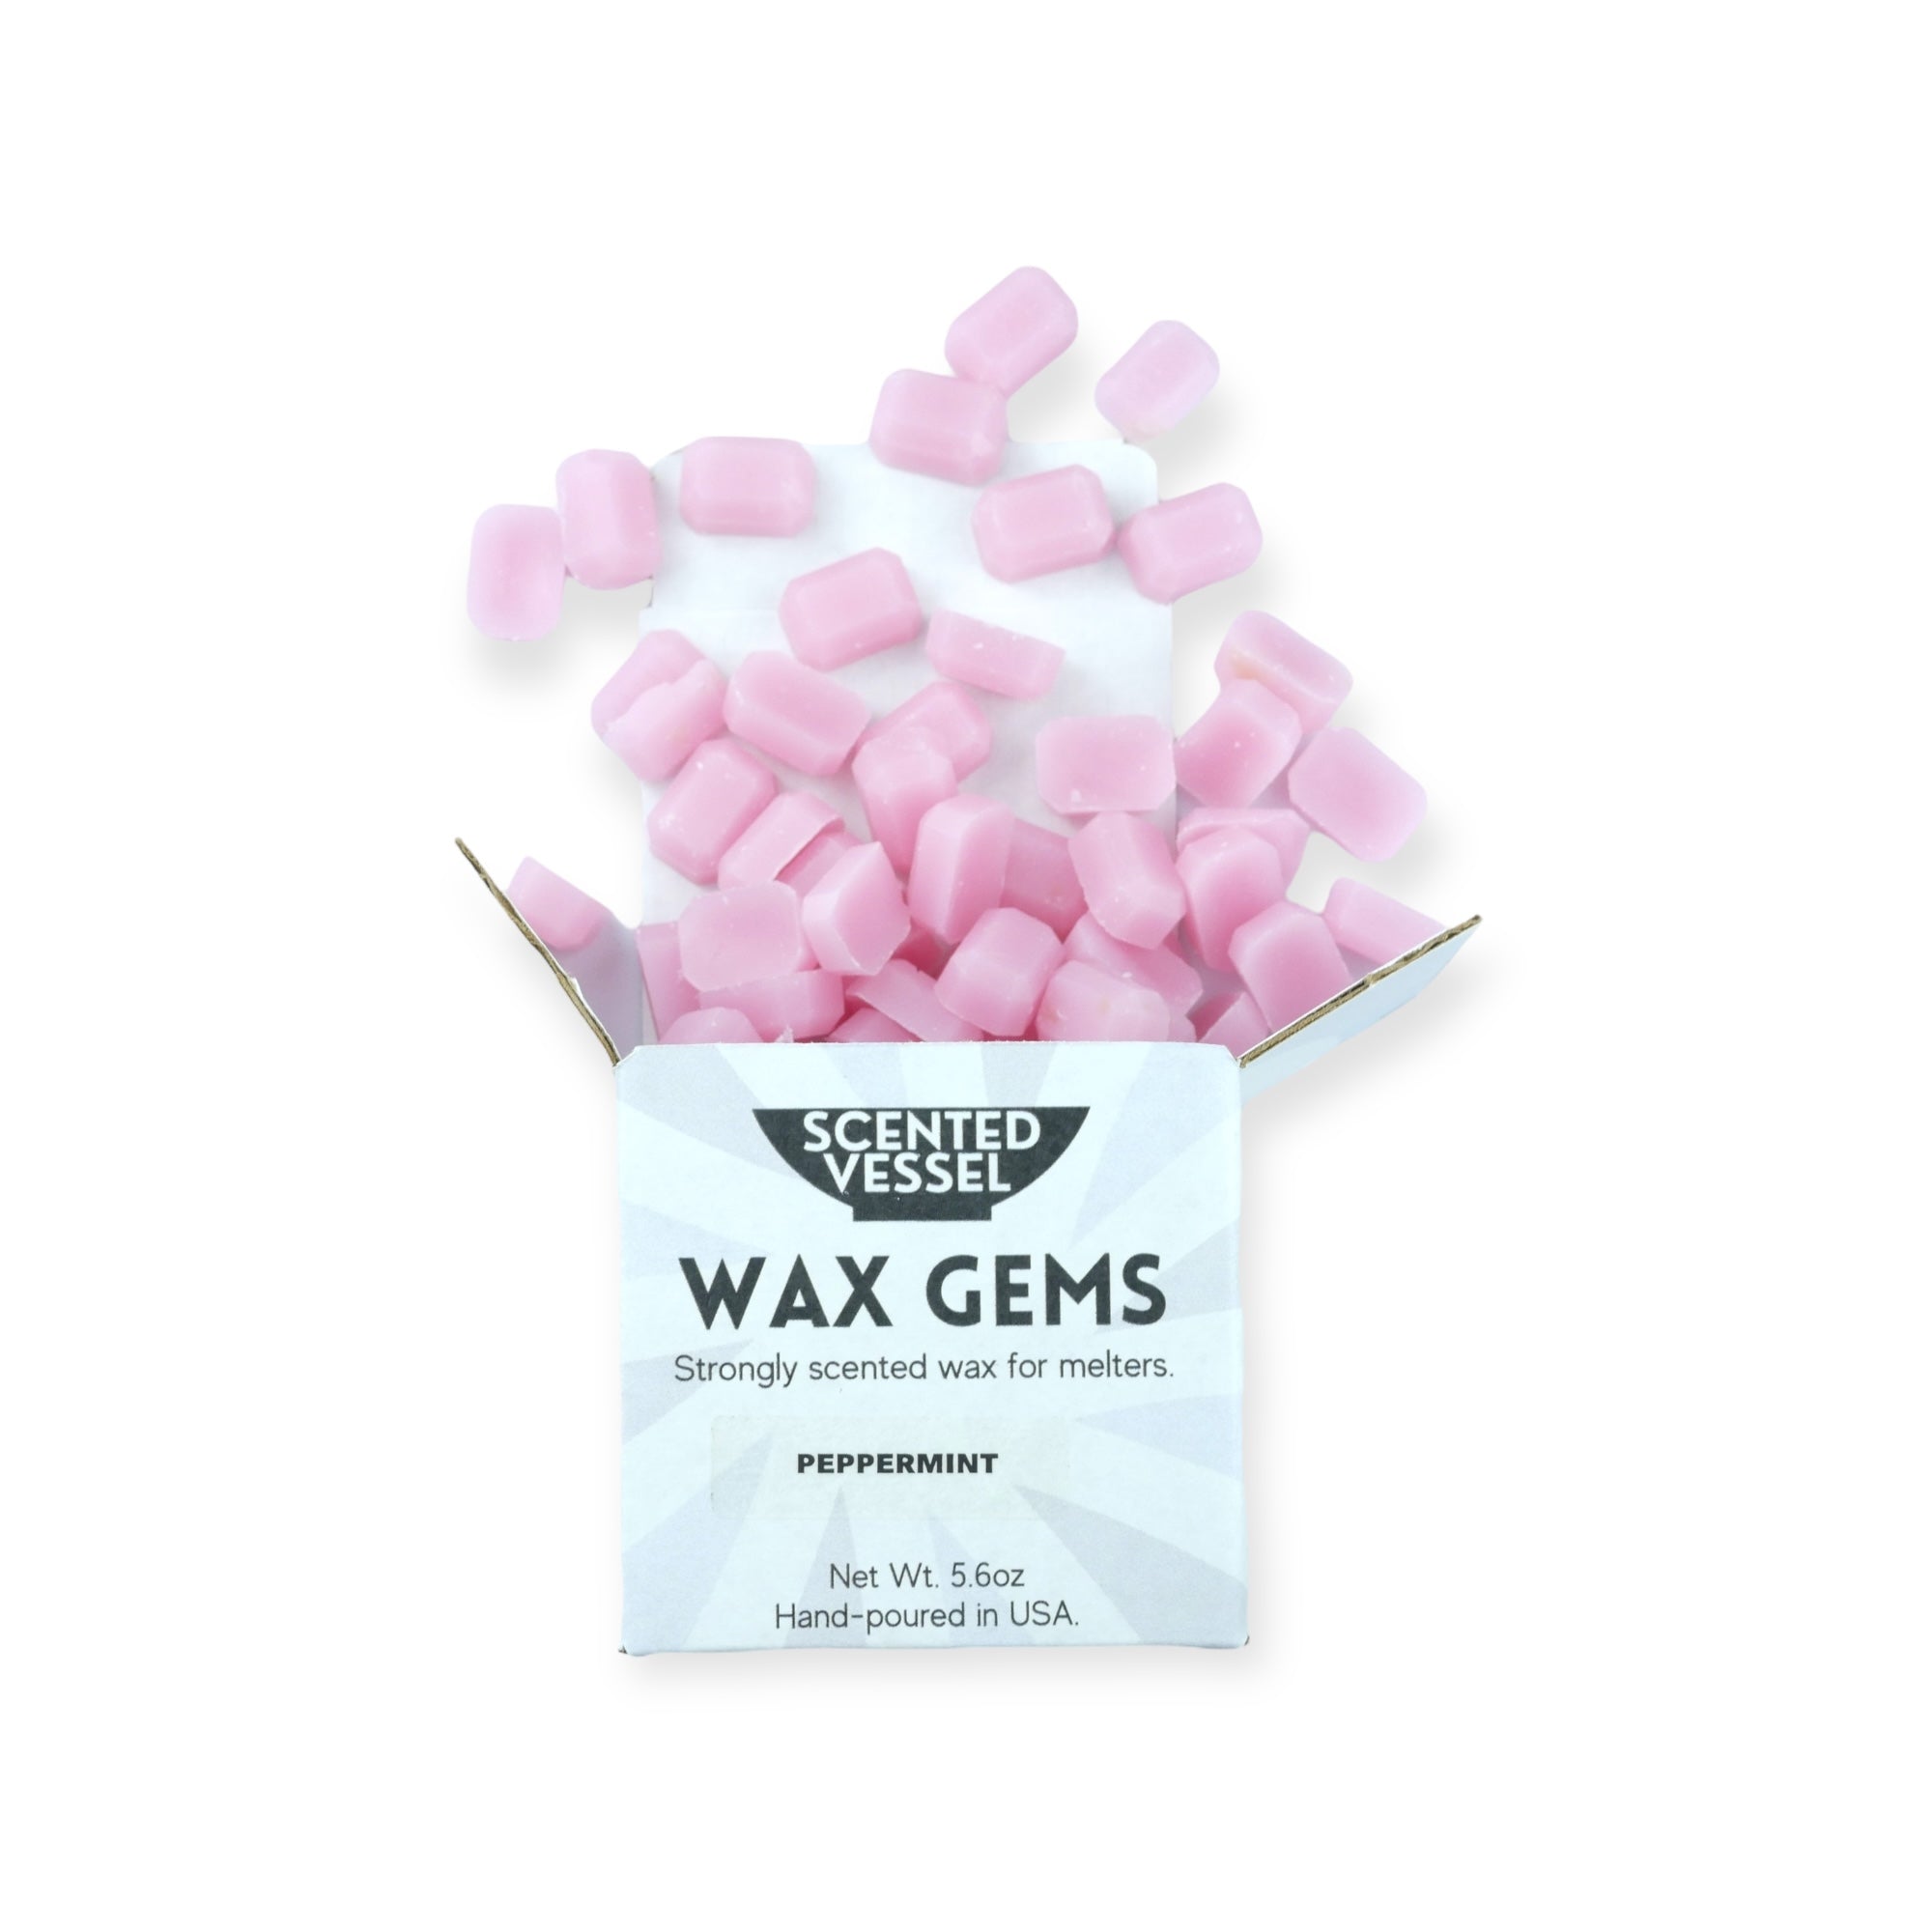 Peppermint 5.6oz Wax Gems by Scented Vessel